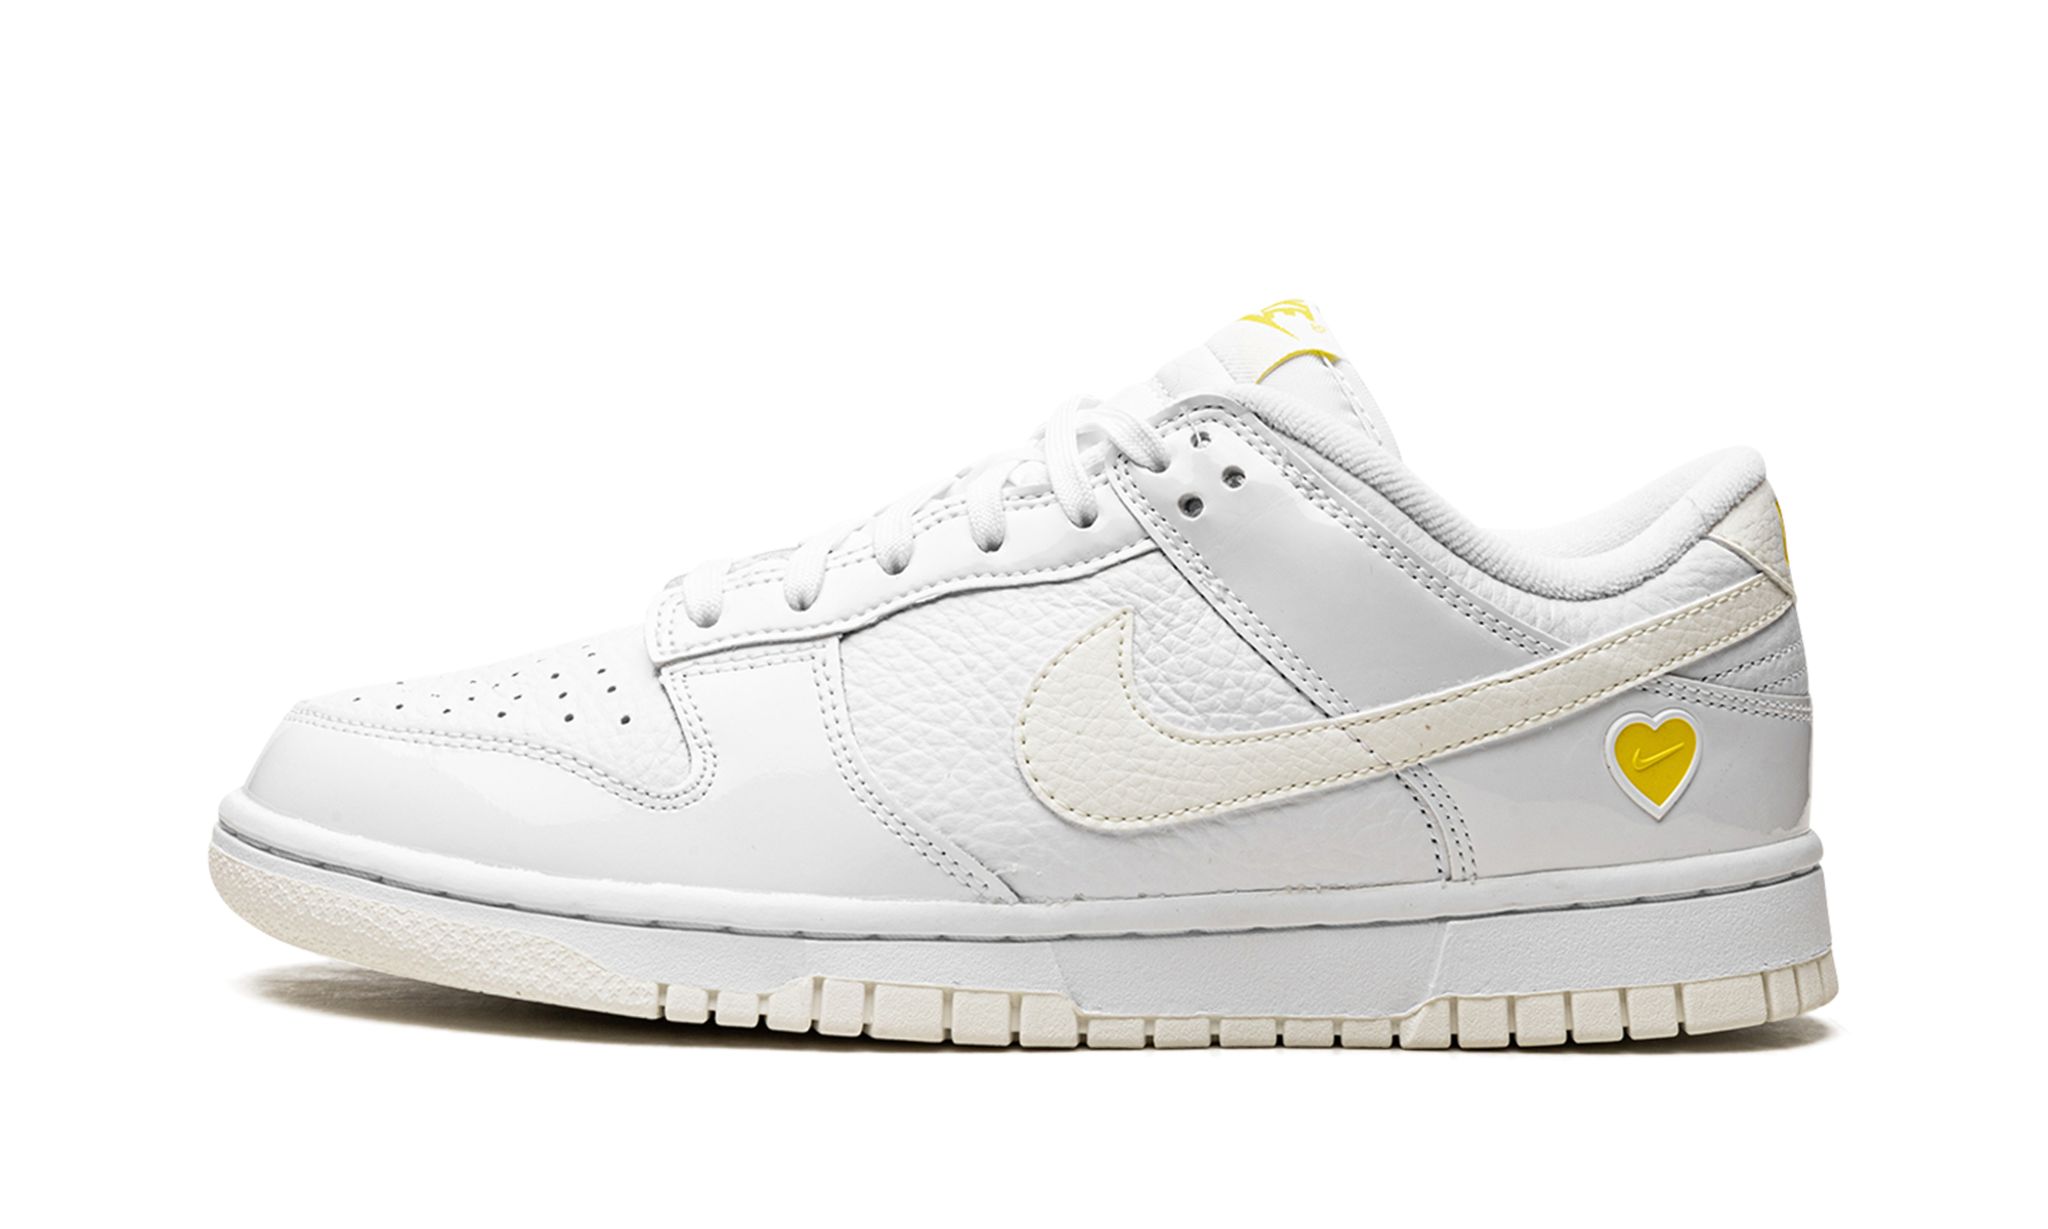 Nike Dunk Low Valentines Day  Yellow Heart